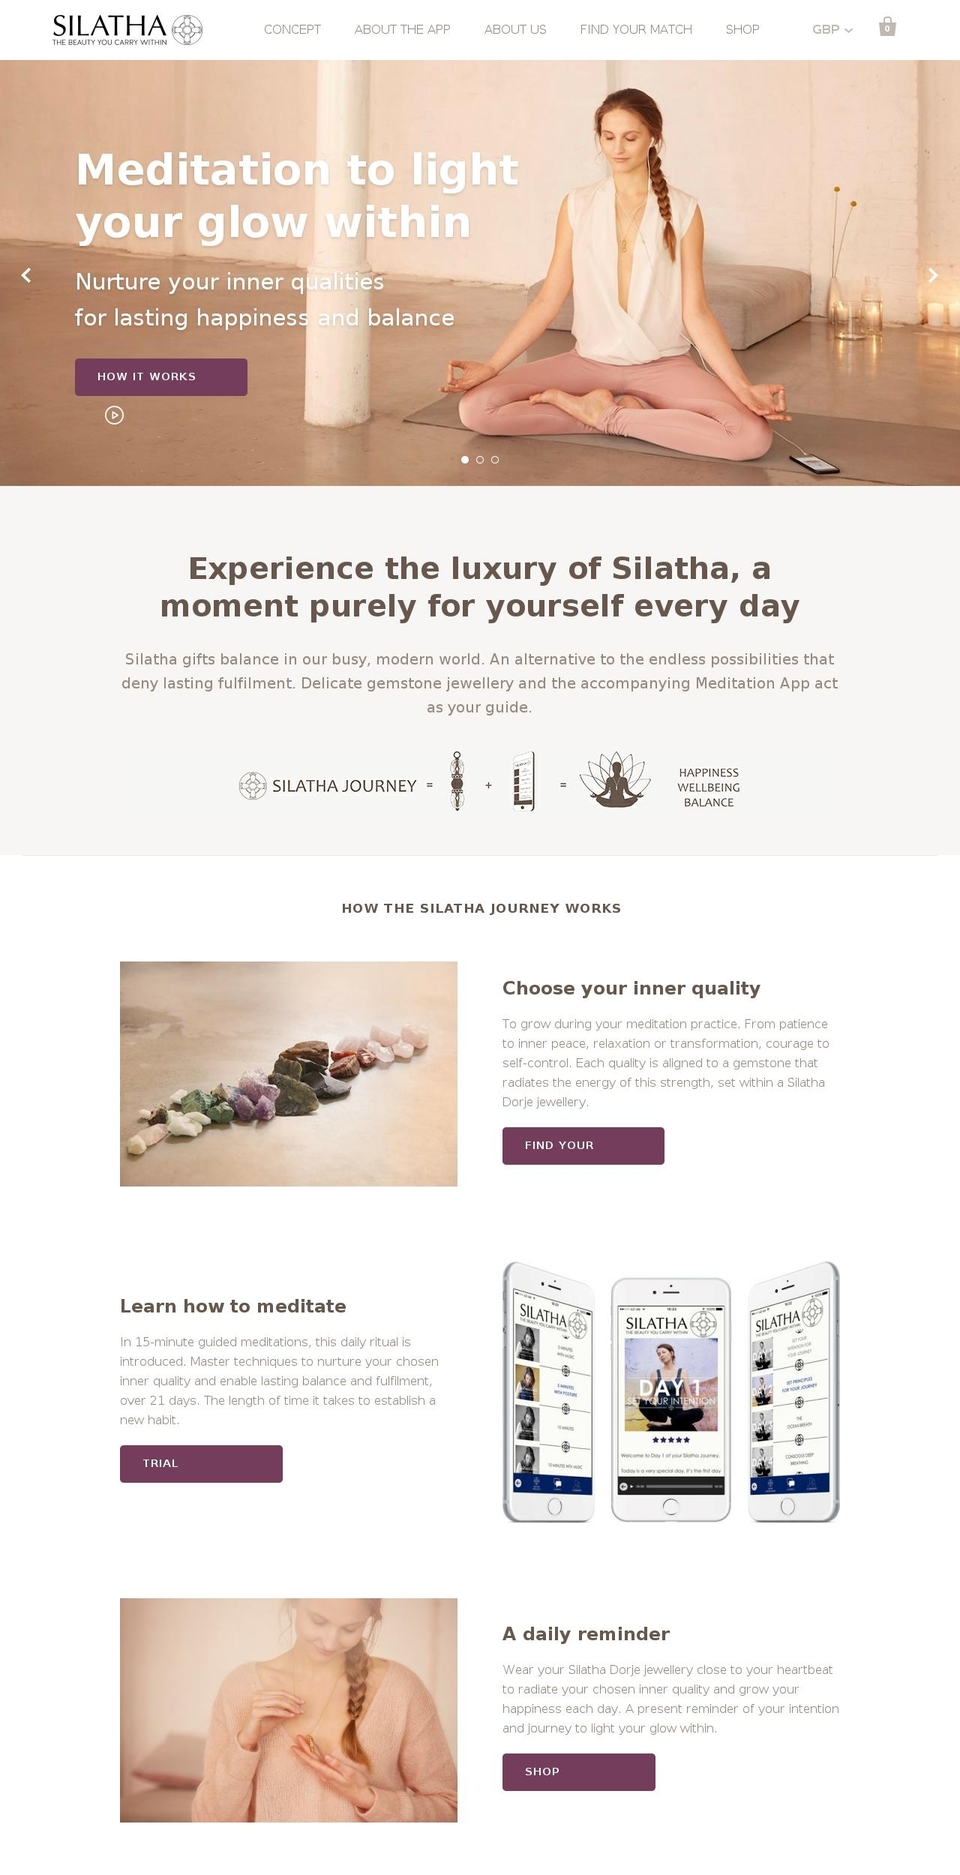 Startup Shopify theme site example silatha.com